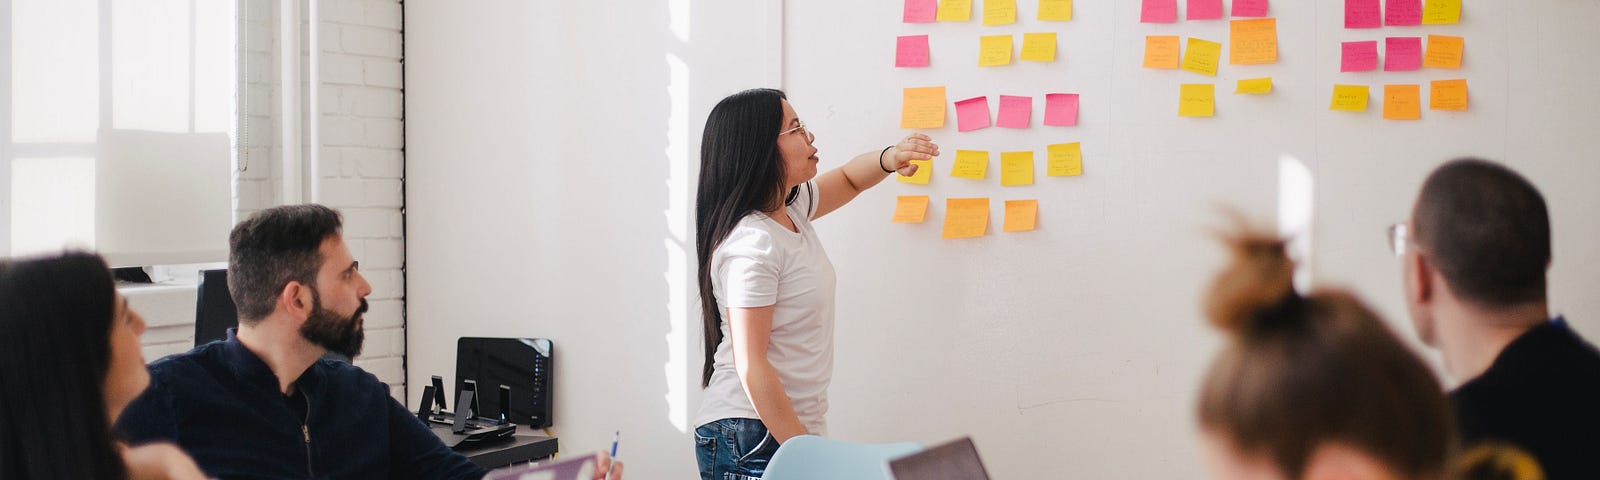 A woman stands in front of colleagues, next to a wall with sticky notes of varying colors. She points to one sticky note.